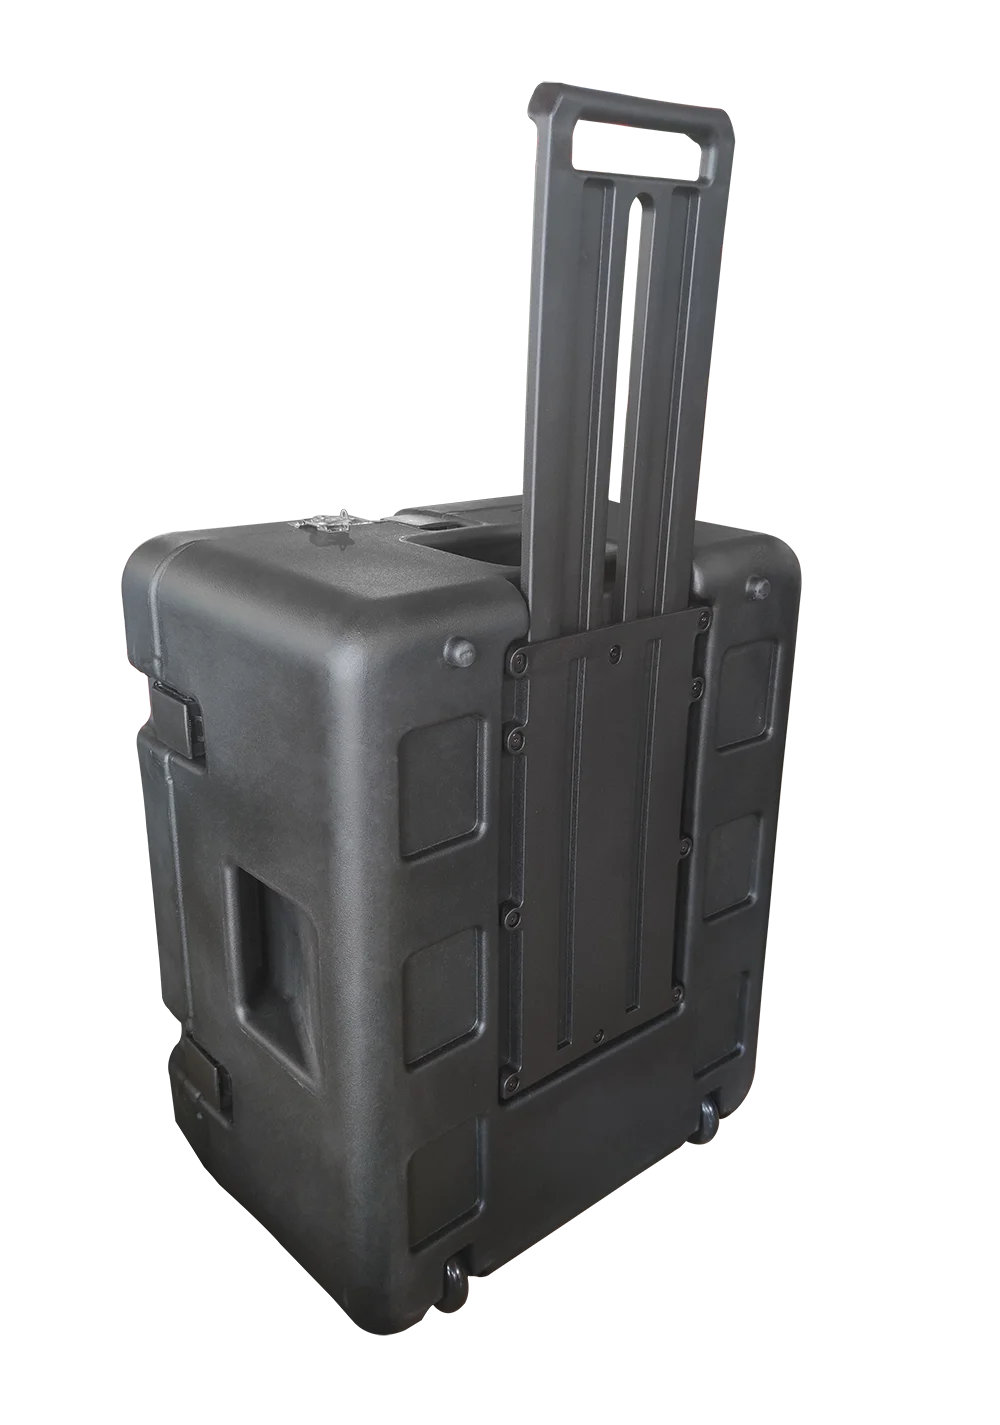 Tricases OEM/ODM case high quality waterproof plastic military equipment dropping case RS810